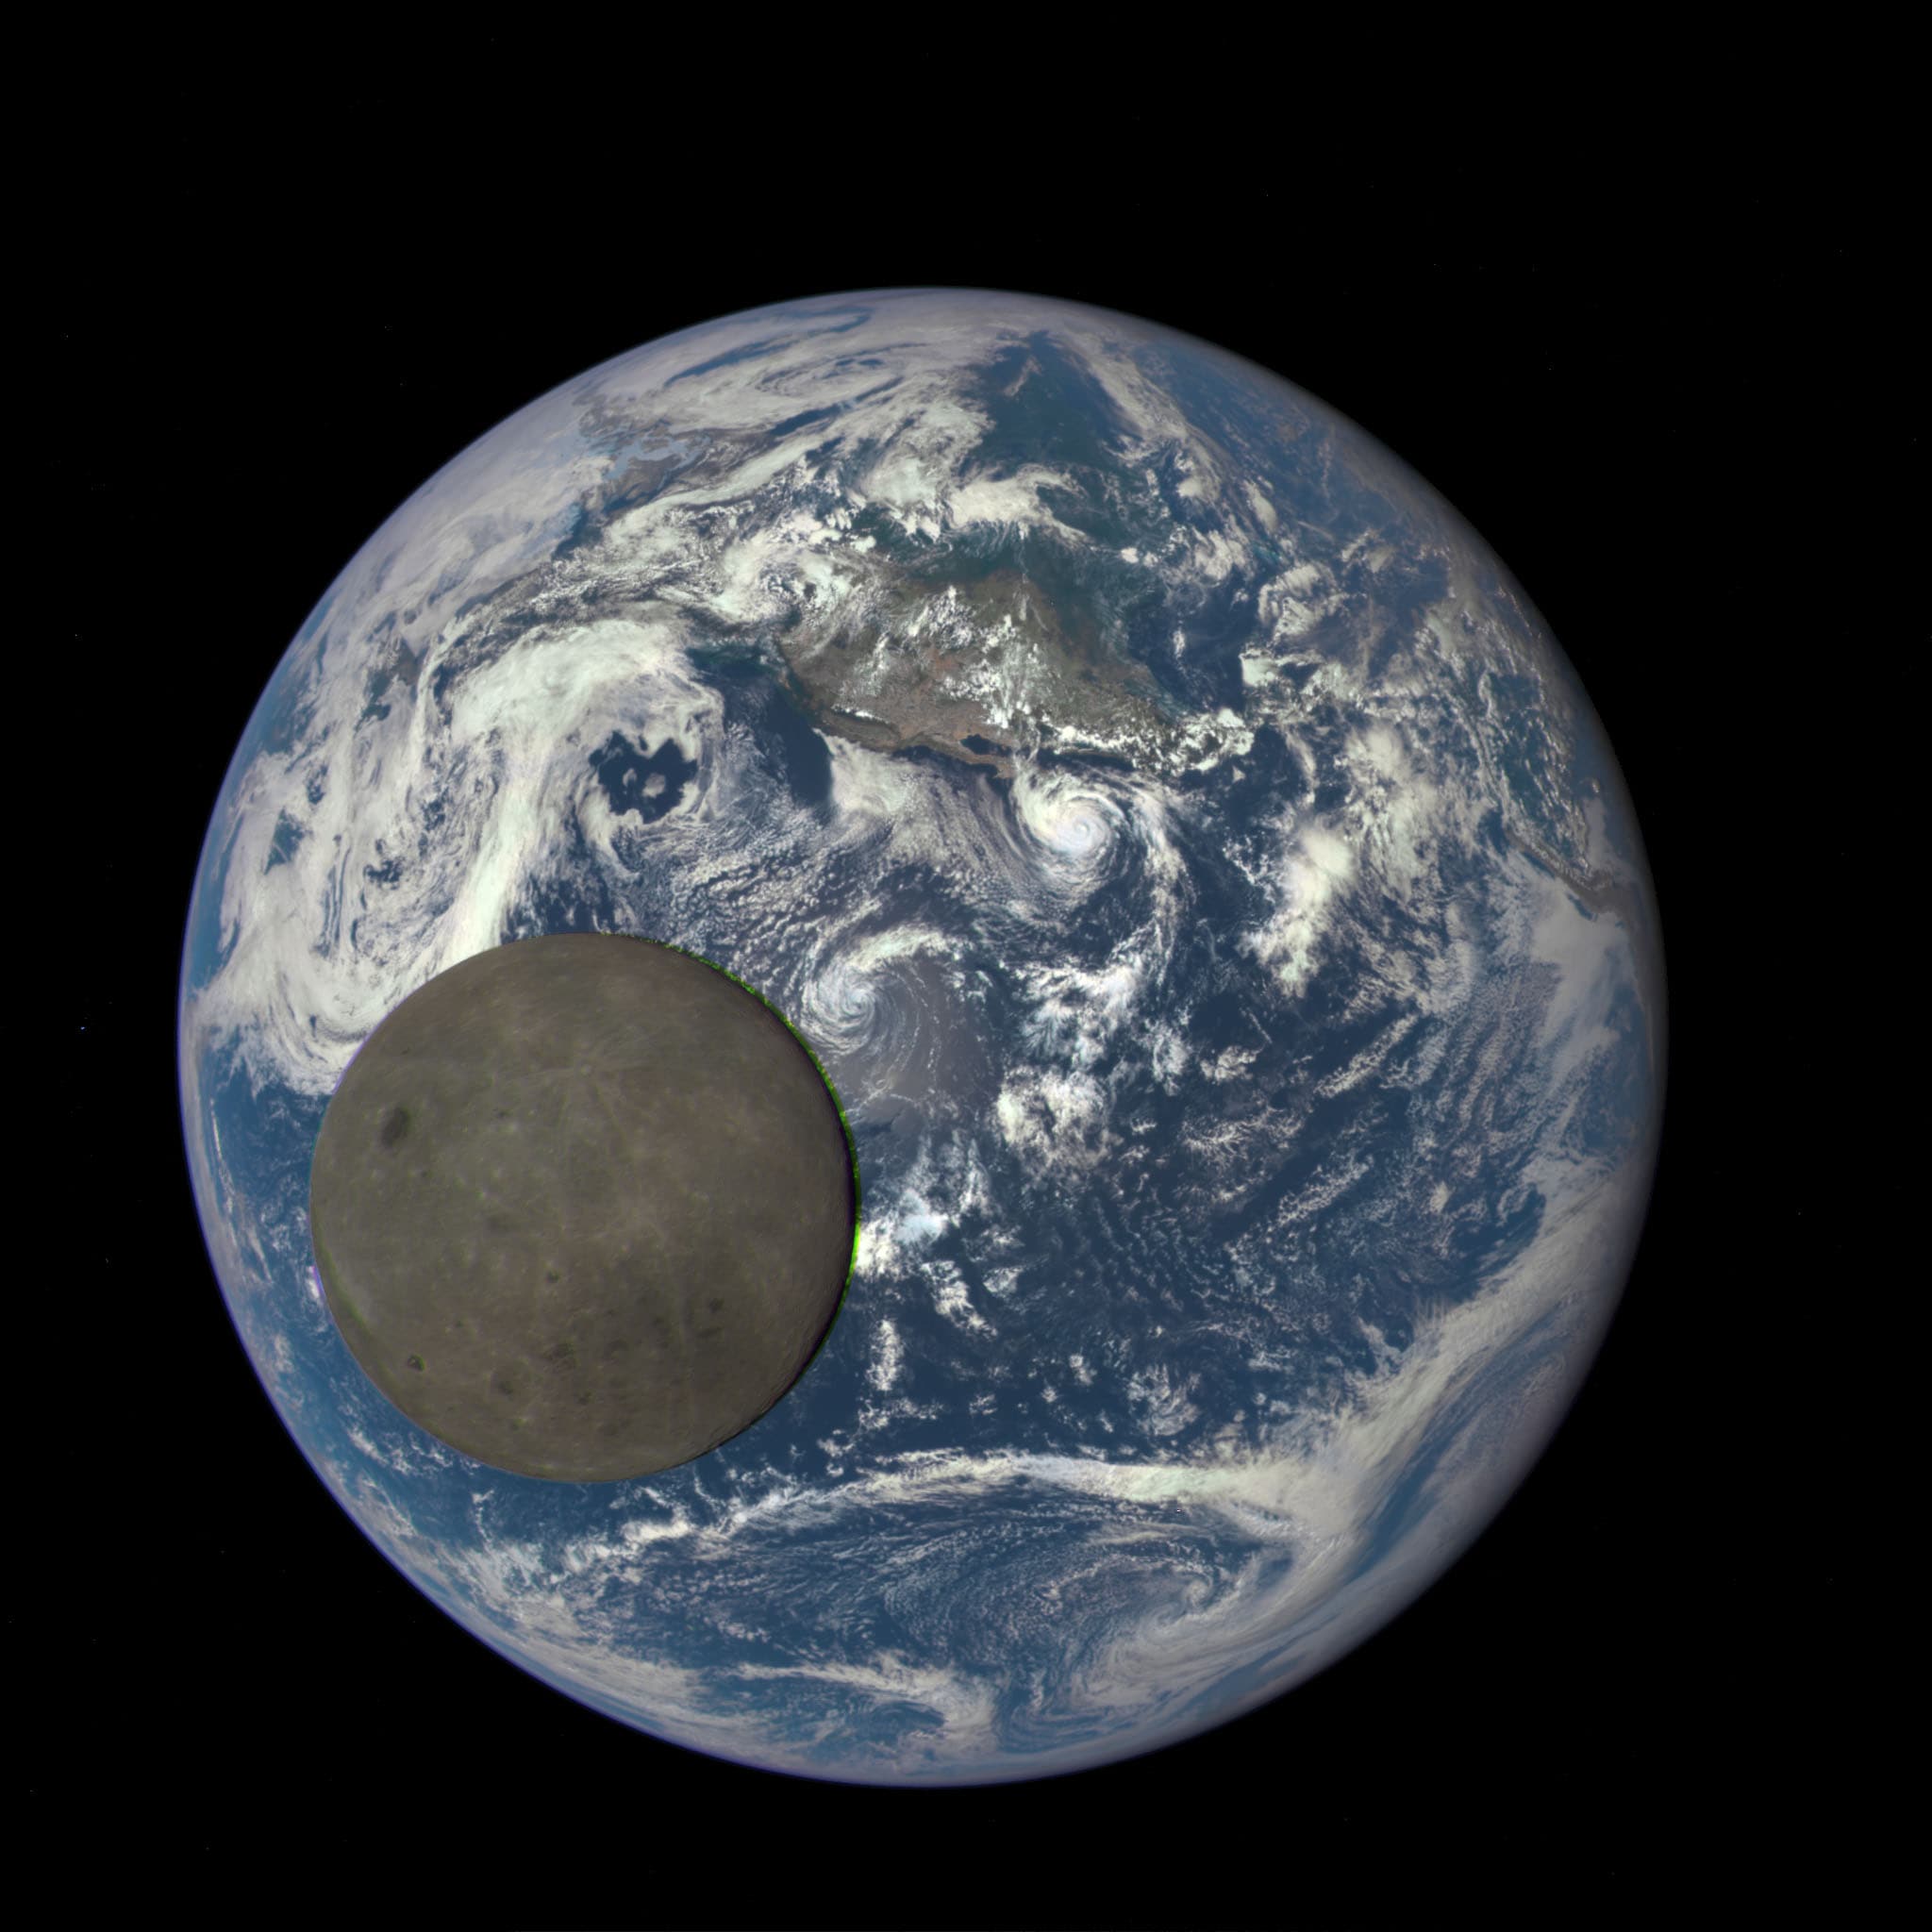 The dark side of the Moon captured by NASA